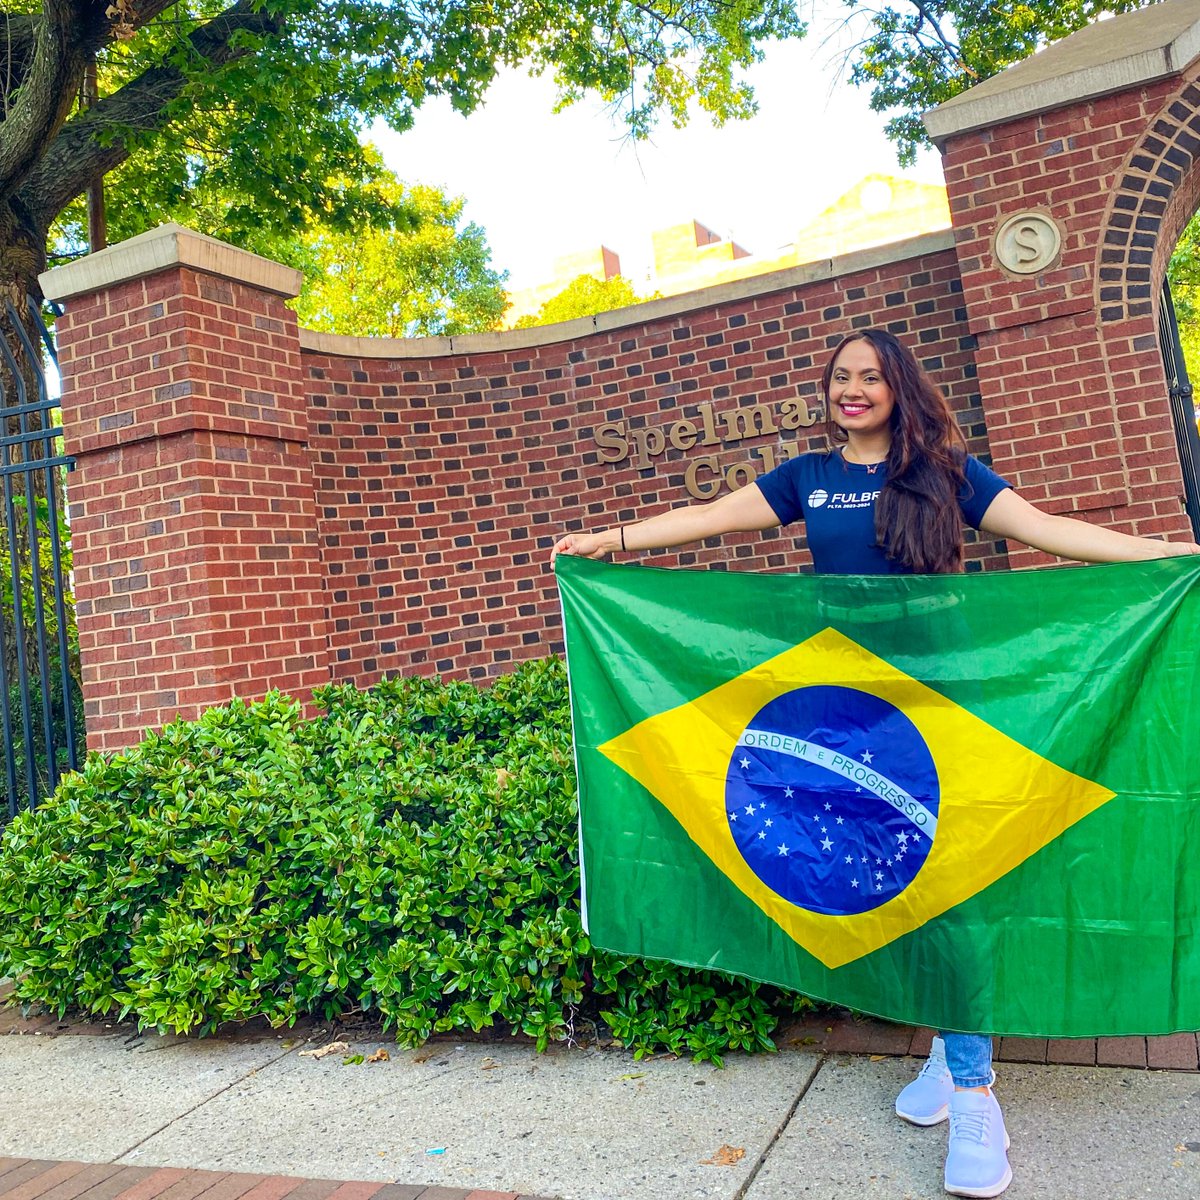 Celebrating Hispanic Heritage Month 🤝 #Fulbright HBCU Institutional Leaders Recognition! Yasmin Paiva de Siqueira is a #Fulbright FLTA from Brazil to @spelman_college, one of our HBCU ILs this year 🌟